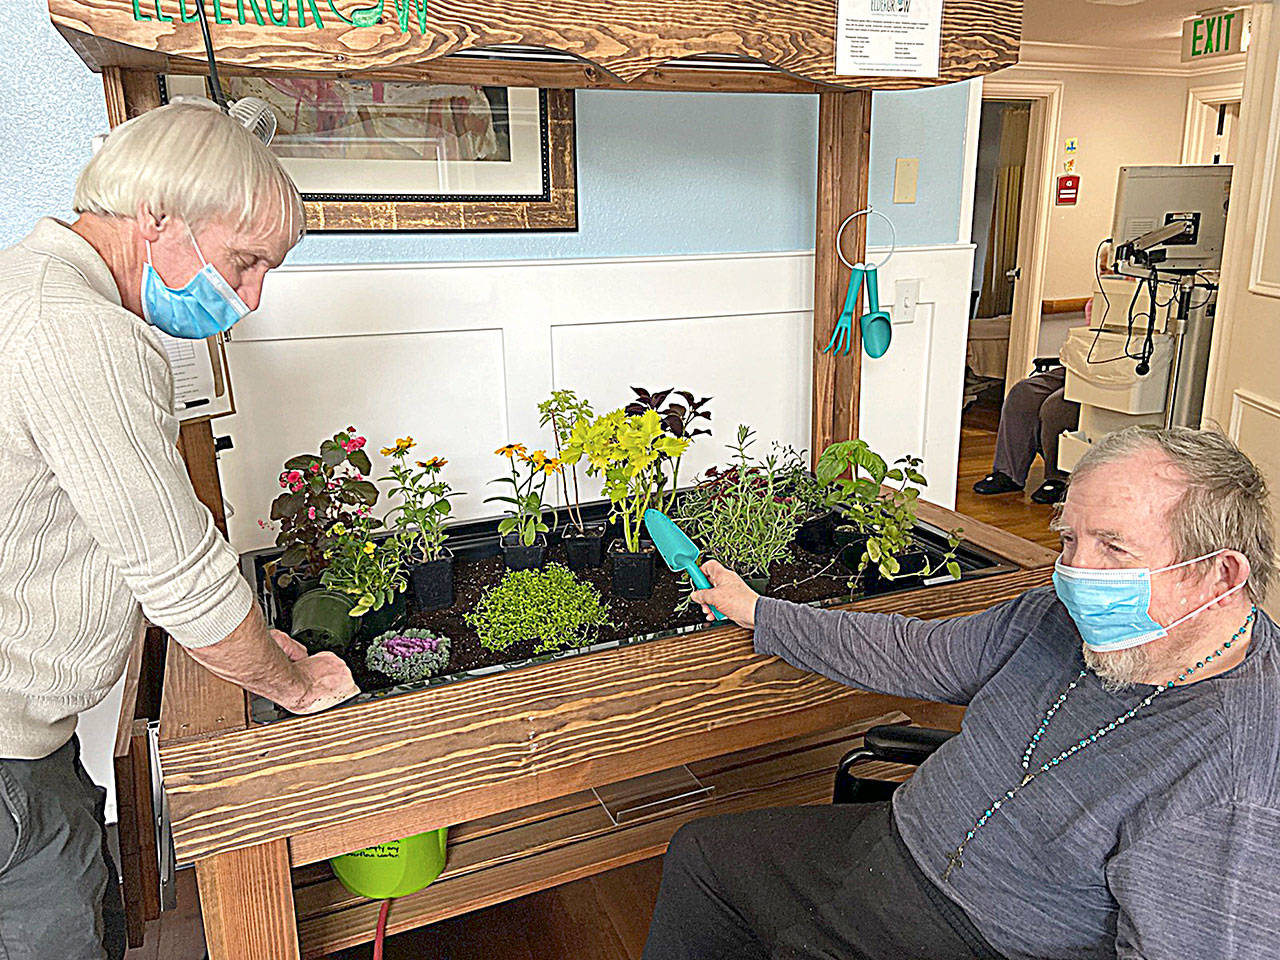 Darrald Dewald, left and Bob Kloempken work in one of the indoor gardens at Pacific Care and Rehabilitation Center.